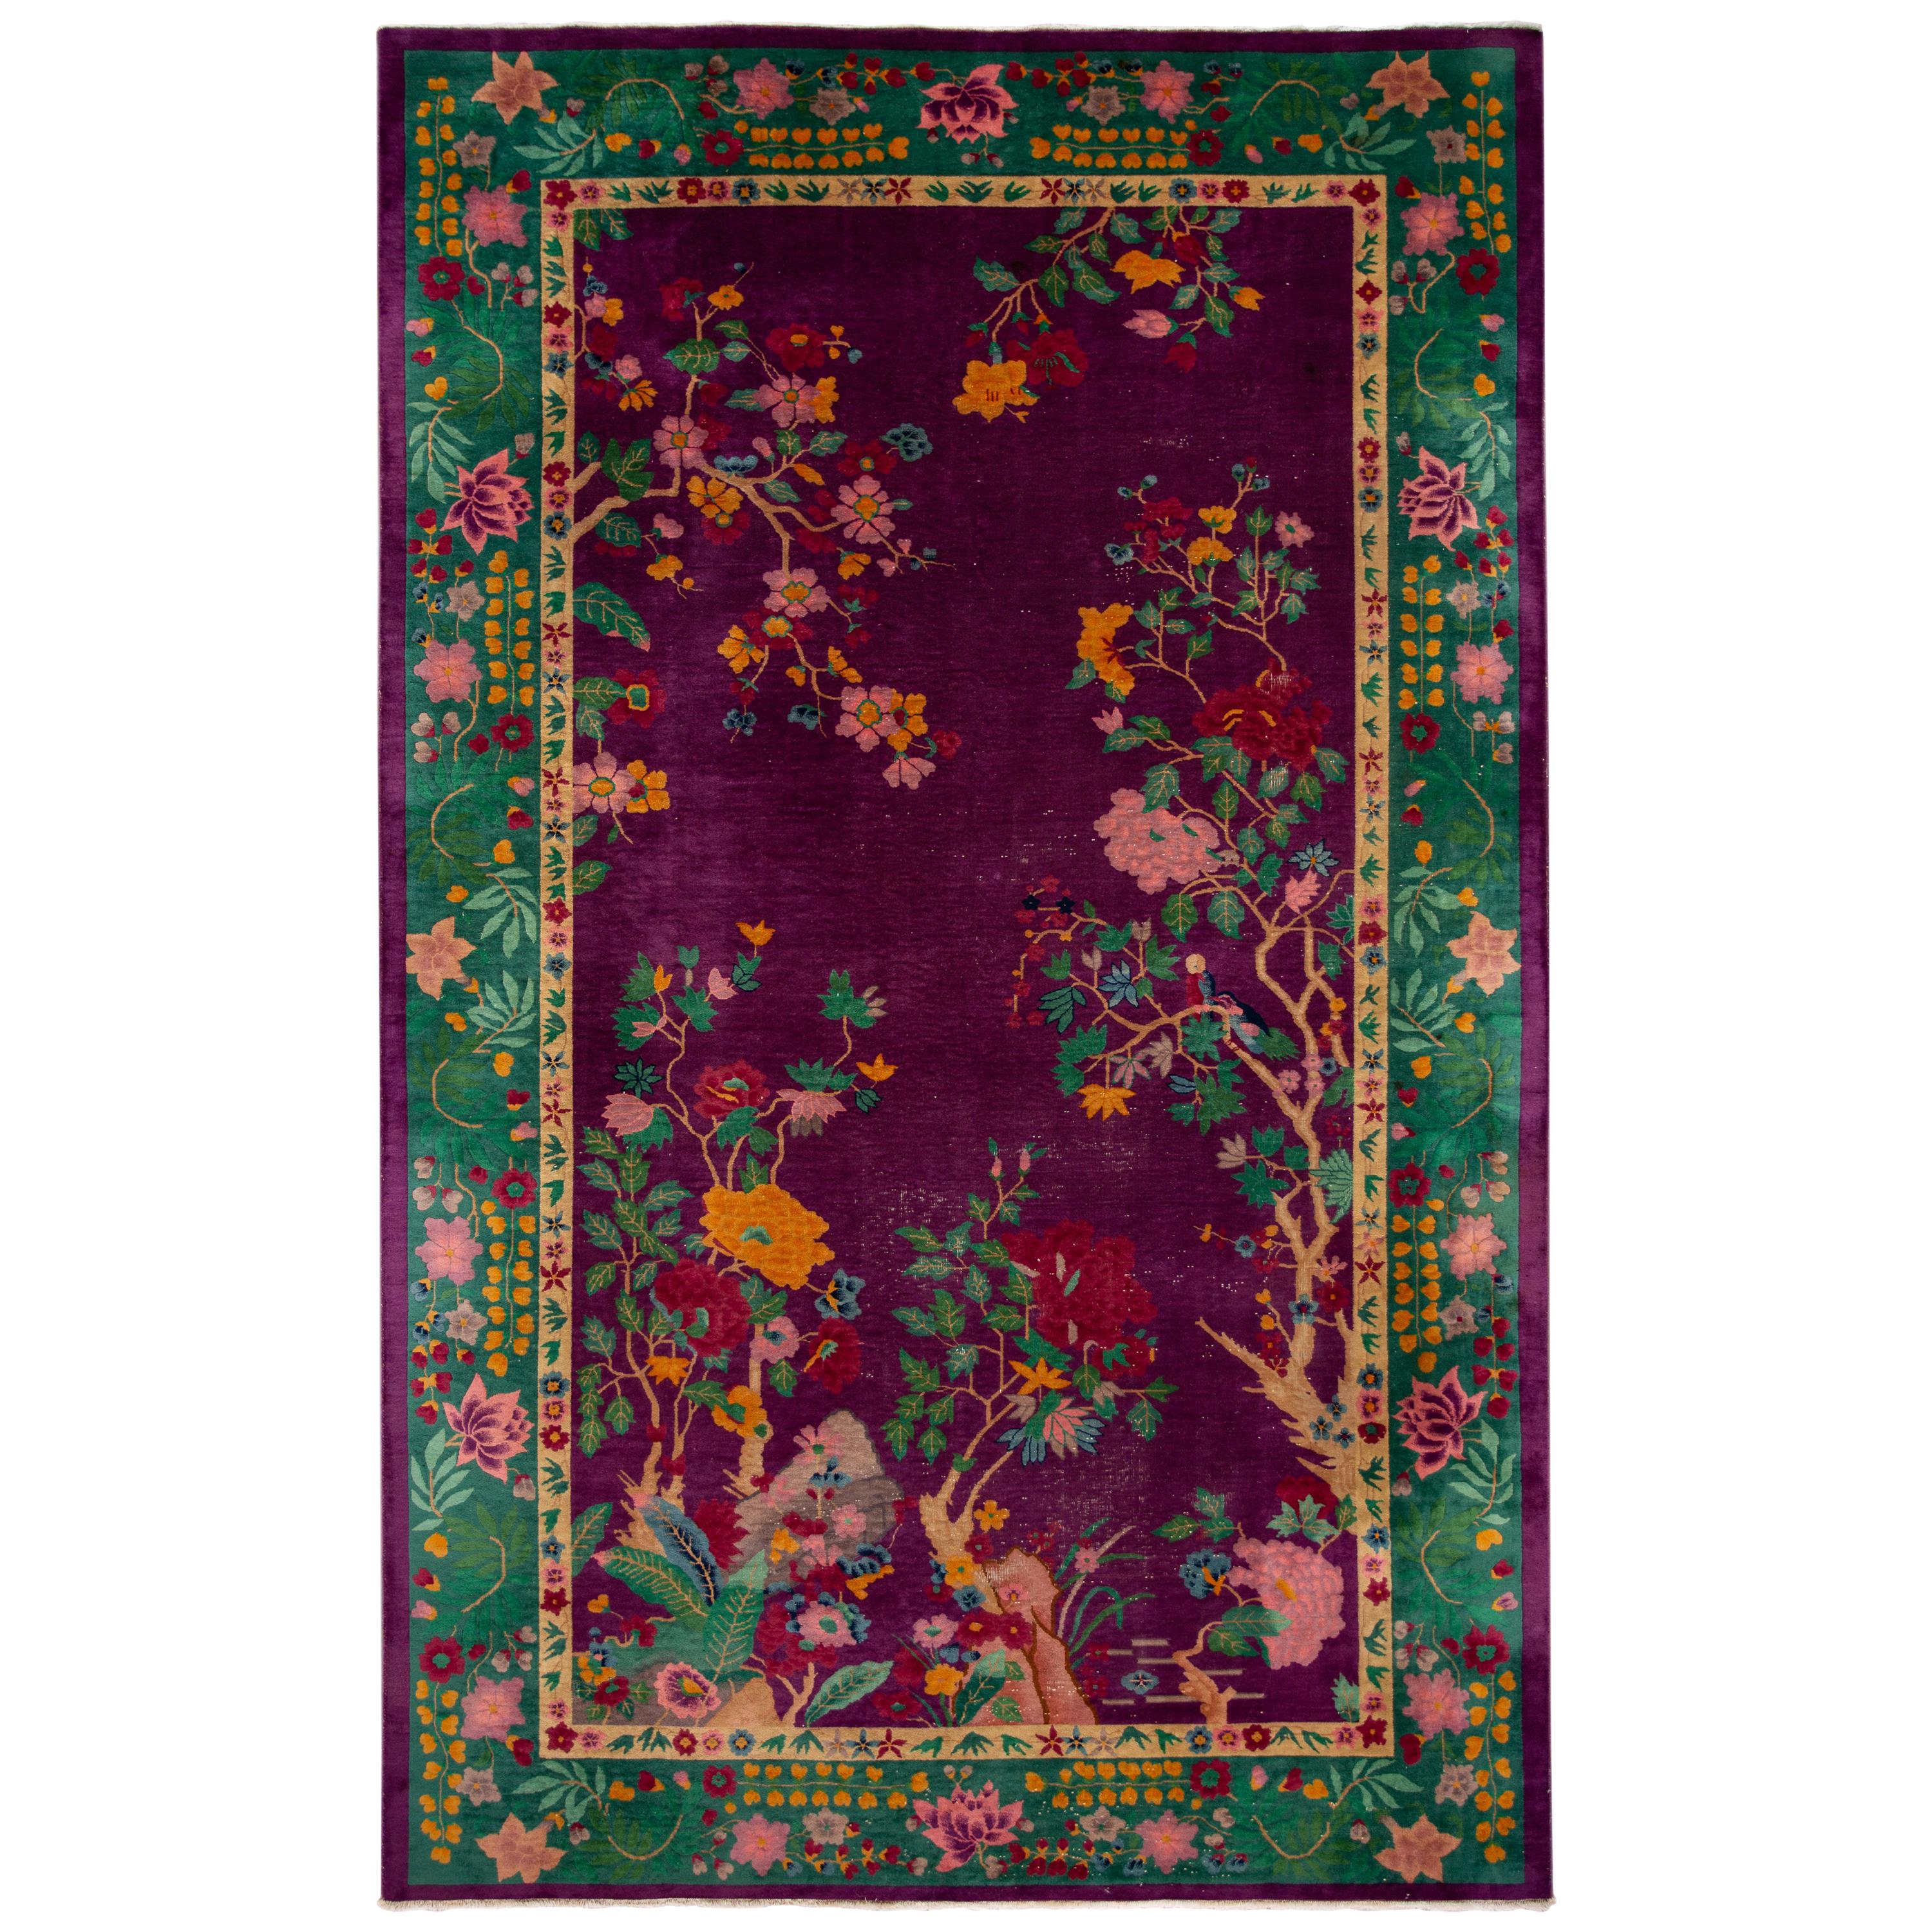 Antique Purple Art Deco Chinese Rug 8 Ft 9 In X 14 Ft 3 In.  For Sale